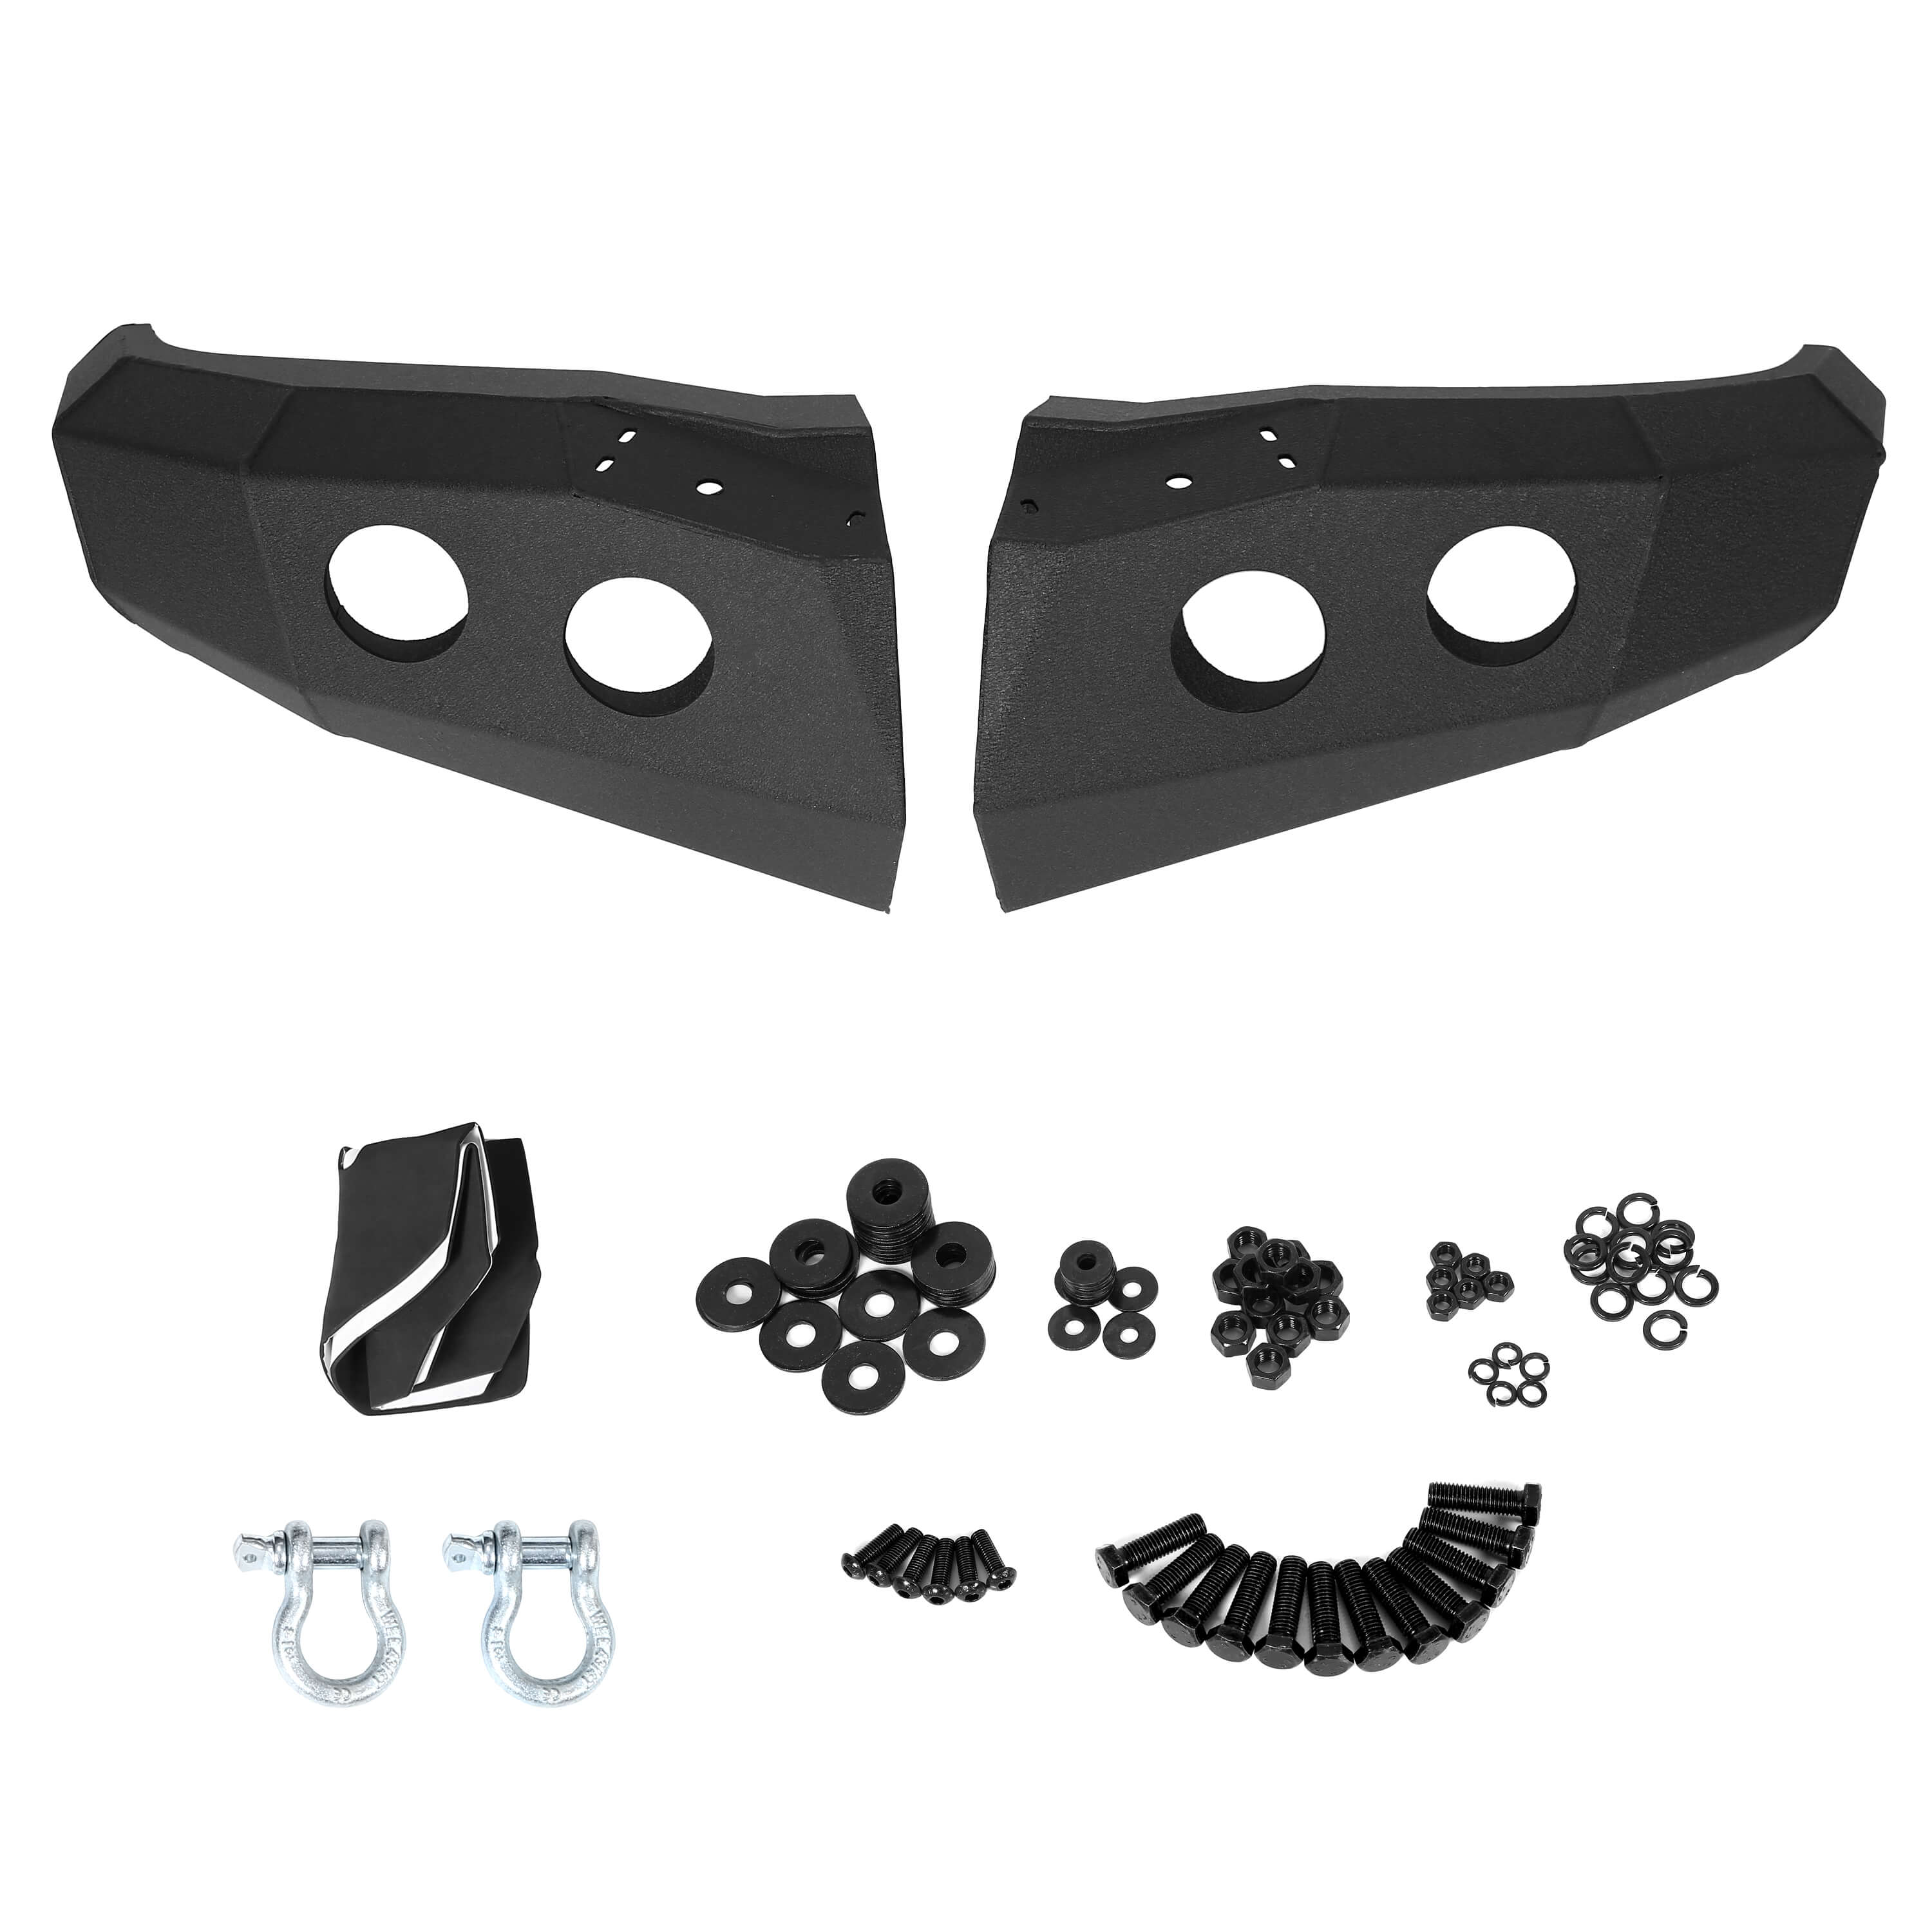 MR.GOP-Offroad Style Front Bumper for 2014-2020 Toyota Tundra,Winch Ready